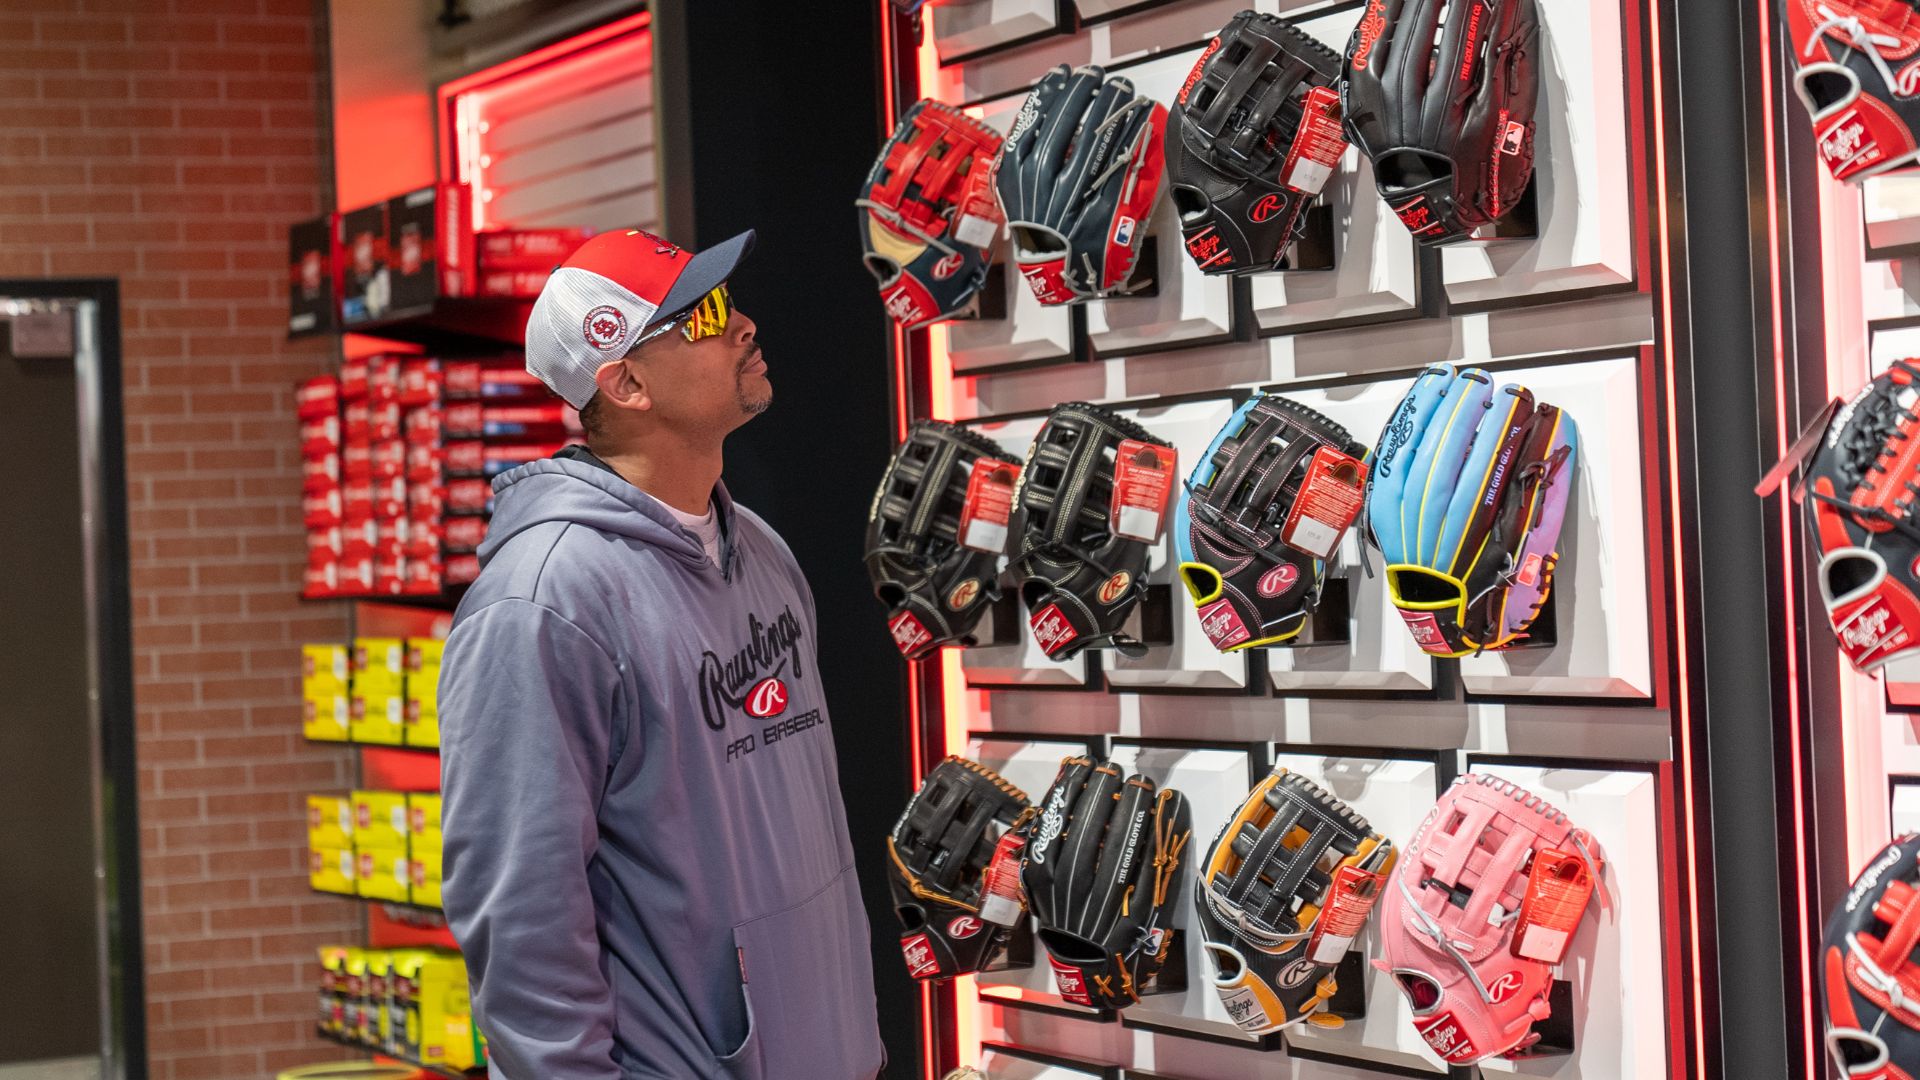 A player shops for baseball gloves at the Rawlings Experience in St. Louis.